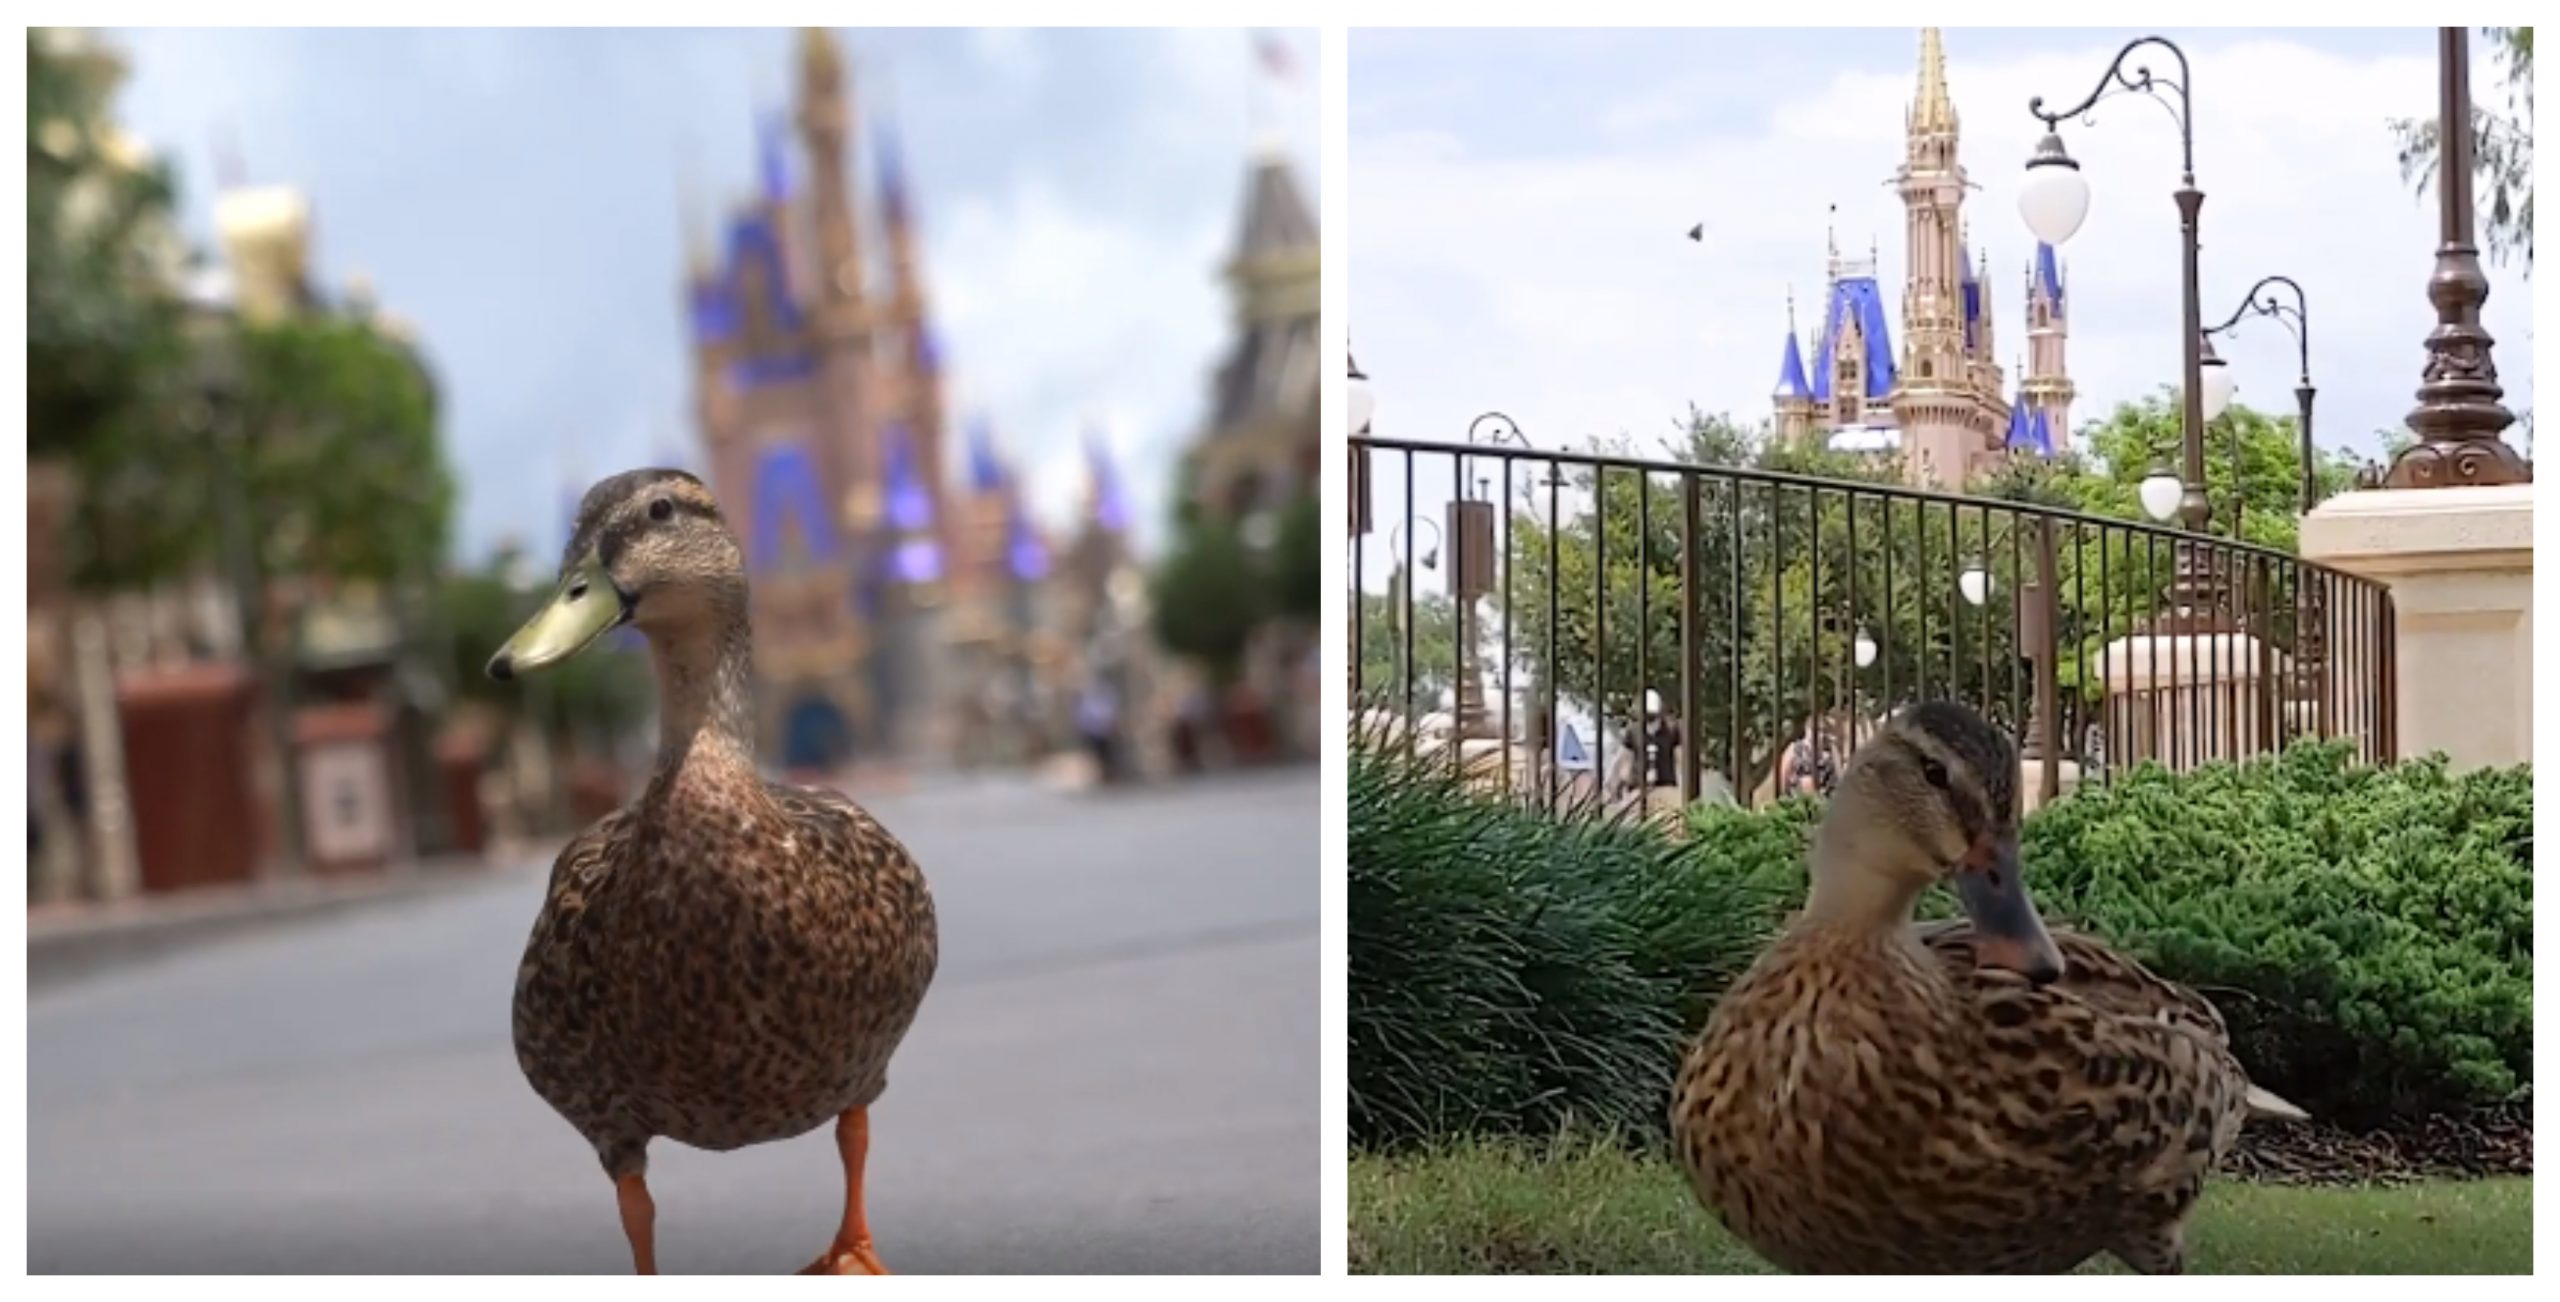 Video: The Ducks of the Magic Kingdom are excited to welcome back guests